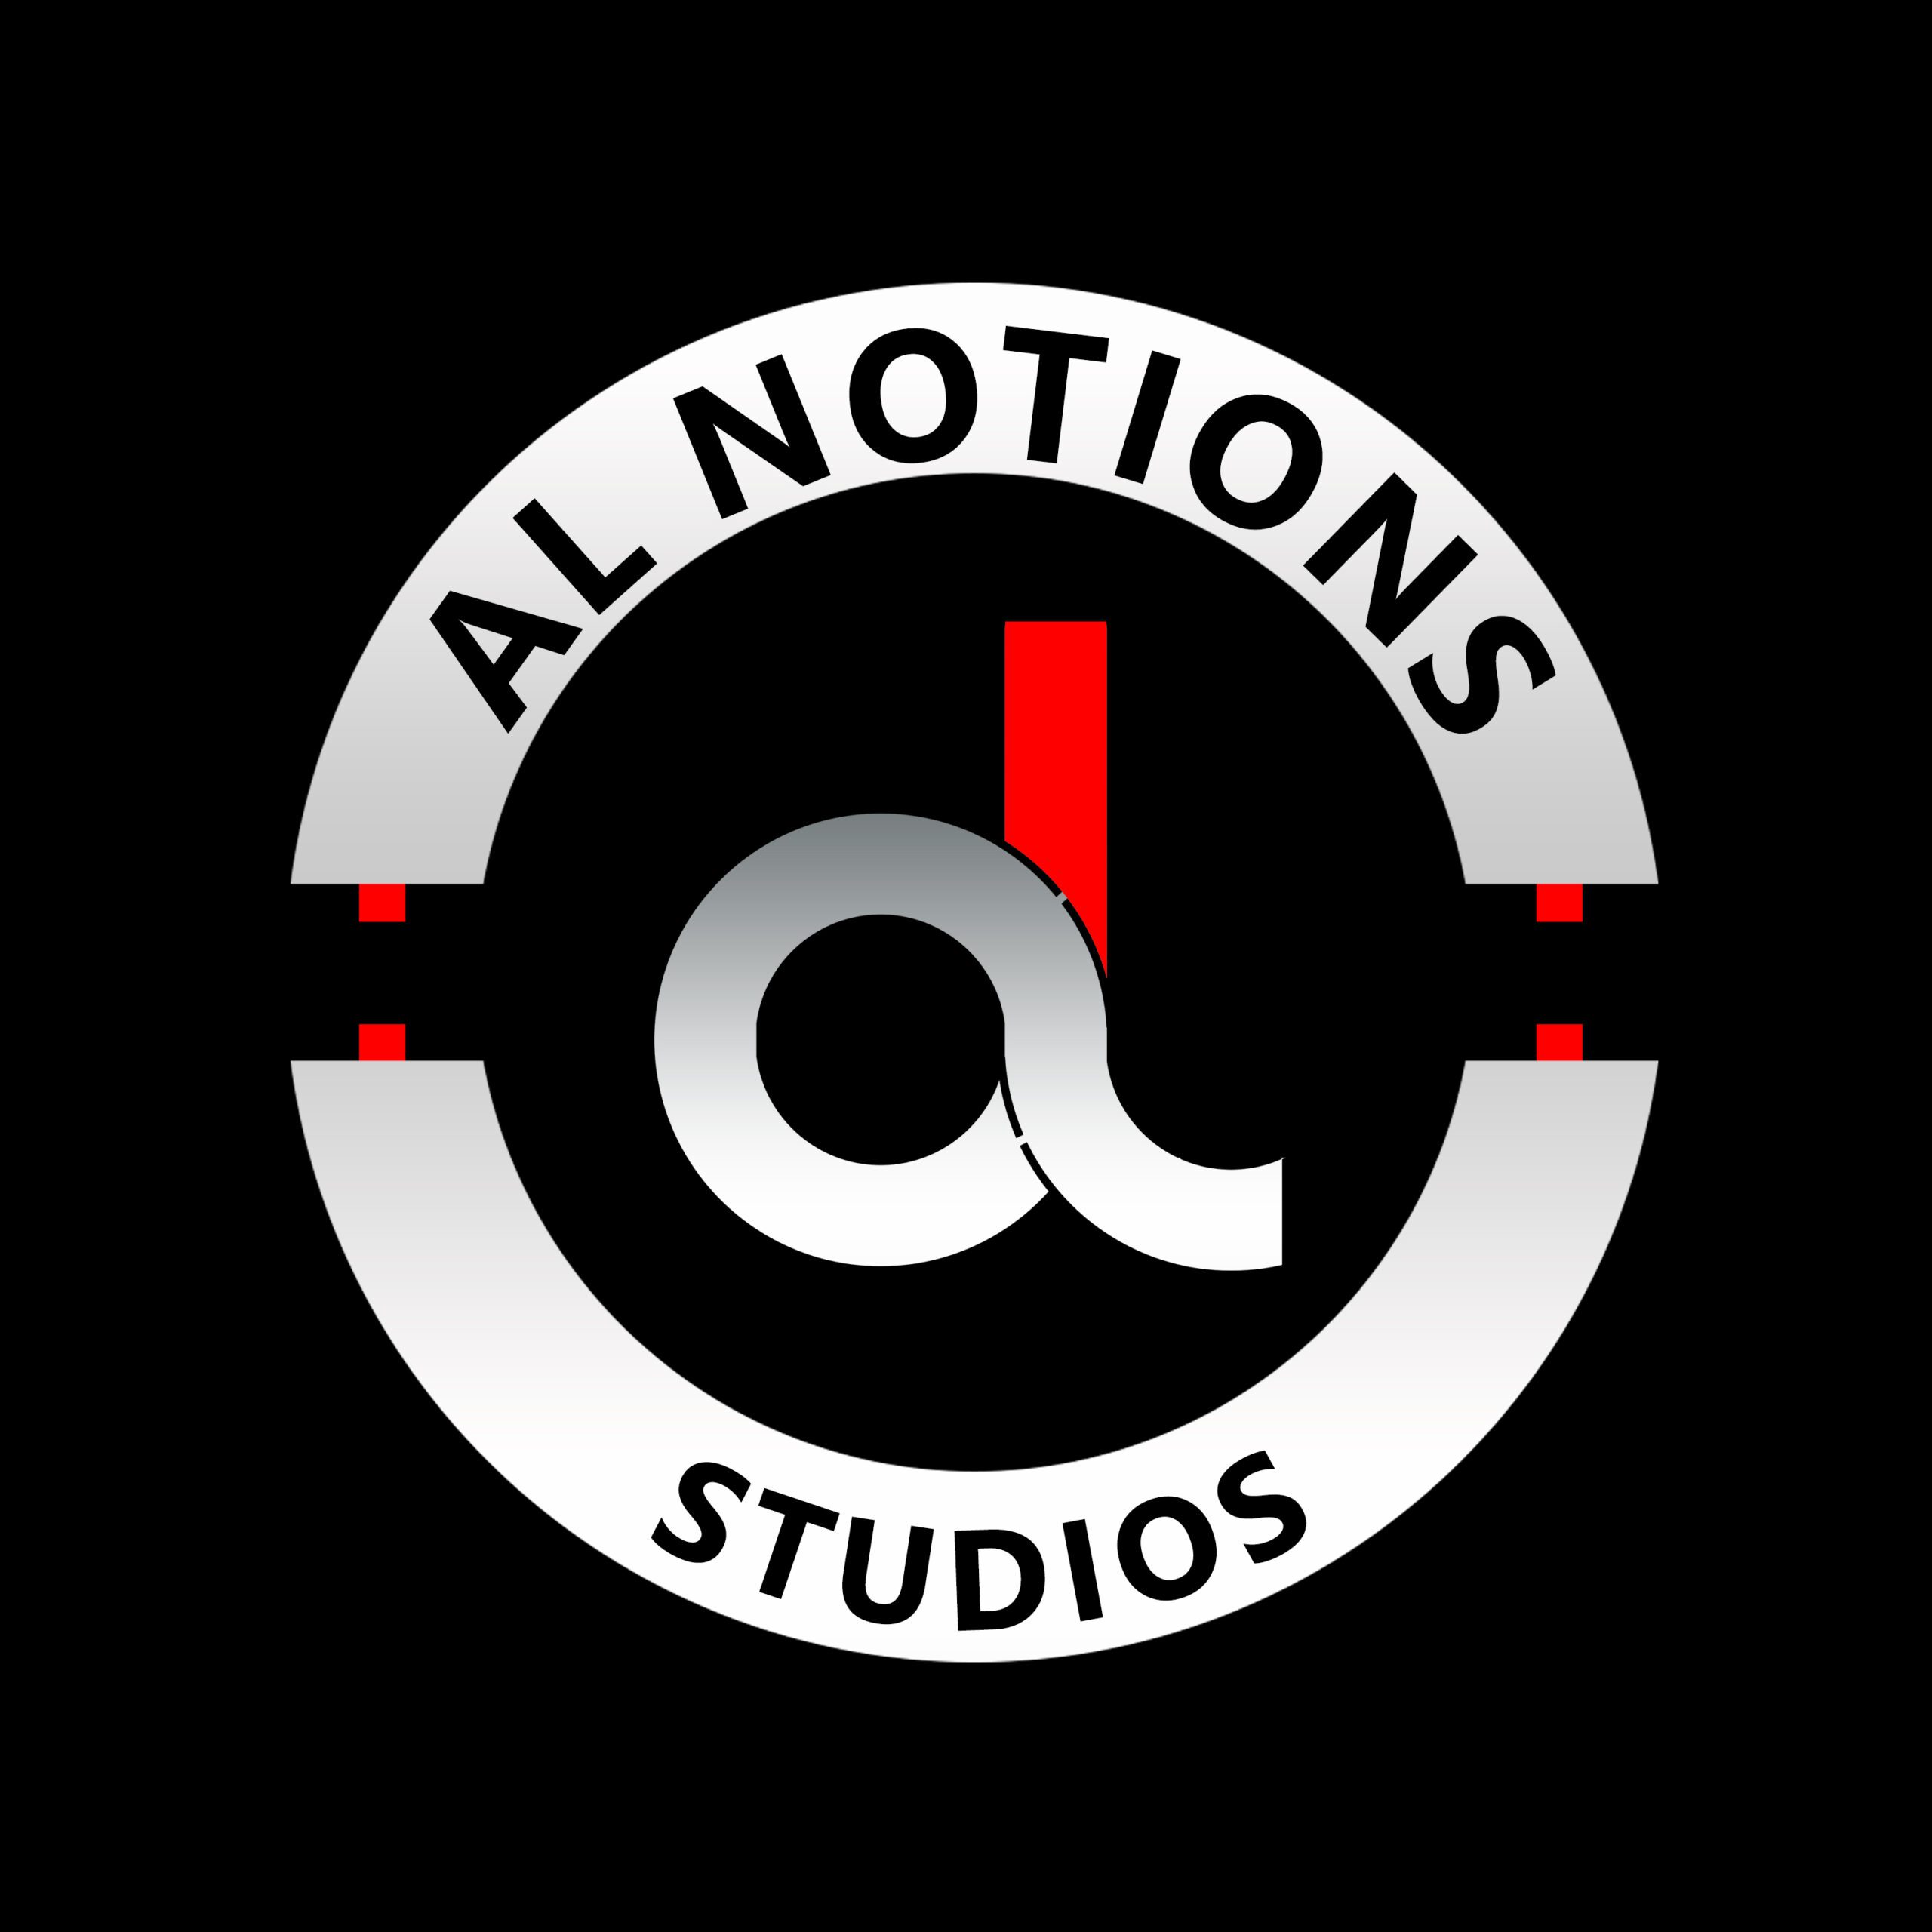 AL NOTIONS LOGO STUDIS scaled - Lateef and Bimpe Adedimeji Set To Produce Large Scale Heritage Projects Under AL Notion Studios (EXCLUSIVE)